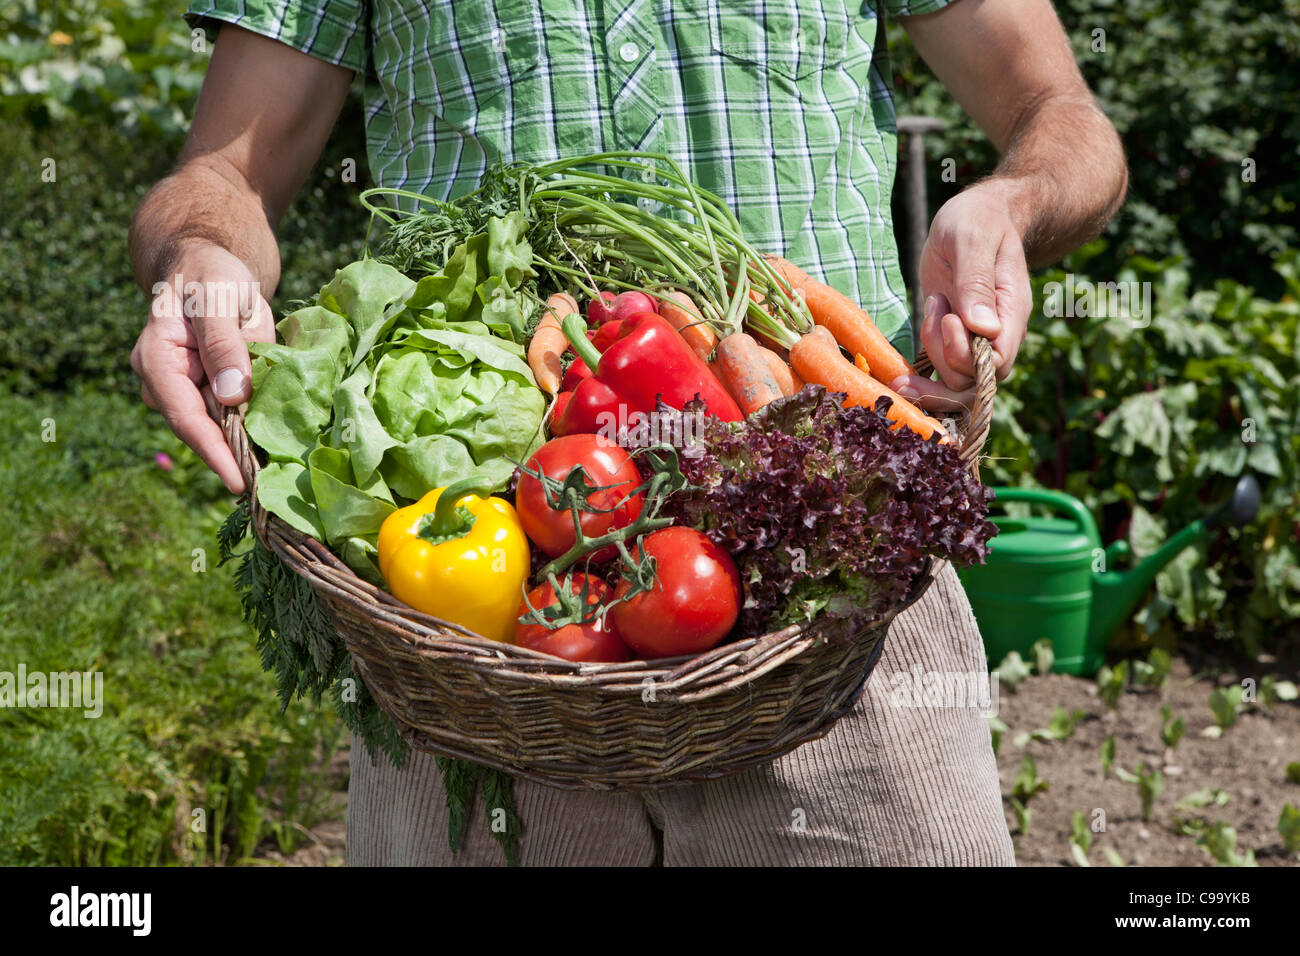 Germany, Bavaria, Altenthann, Man with basket full of vegetables Stock Photo